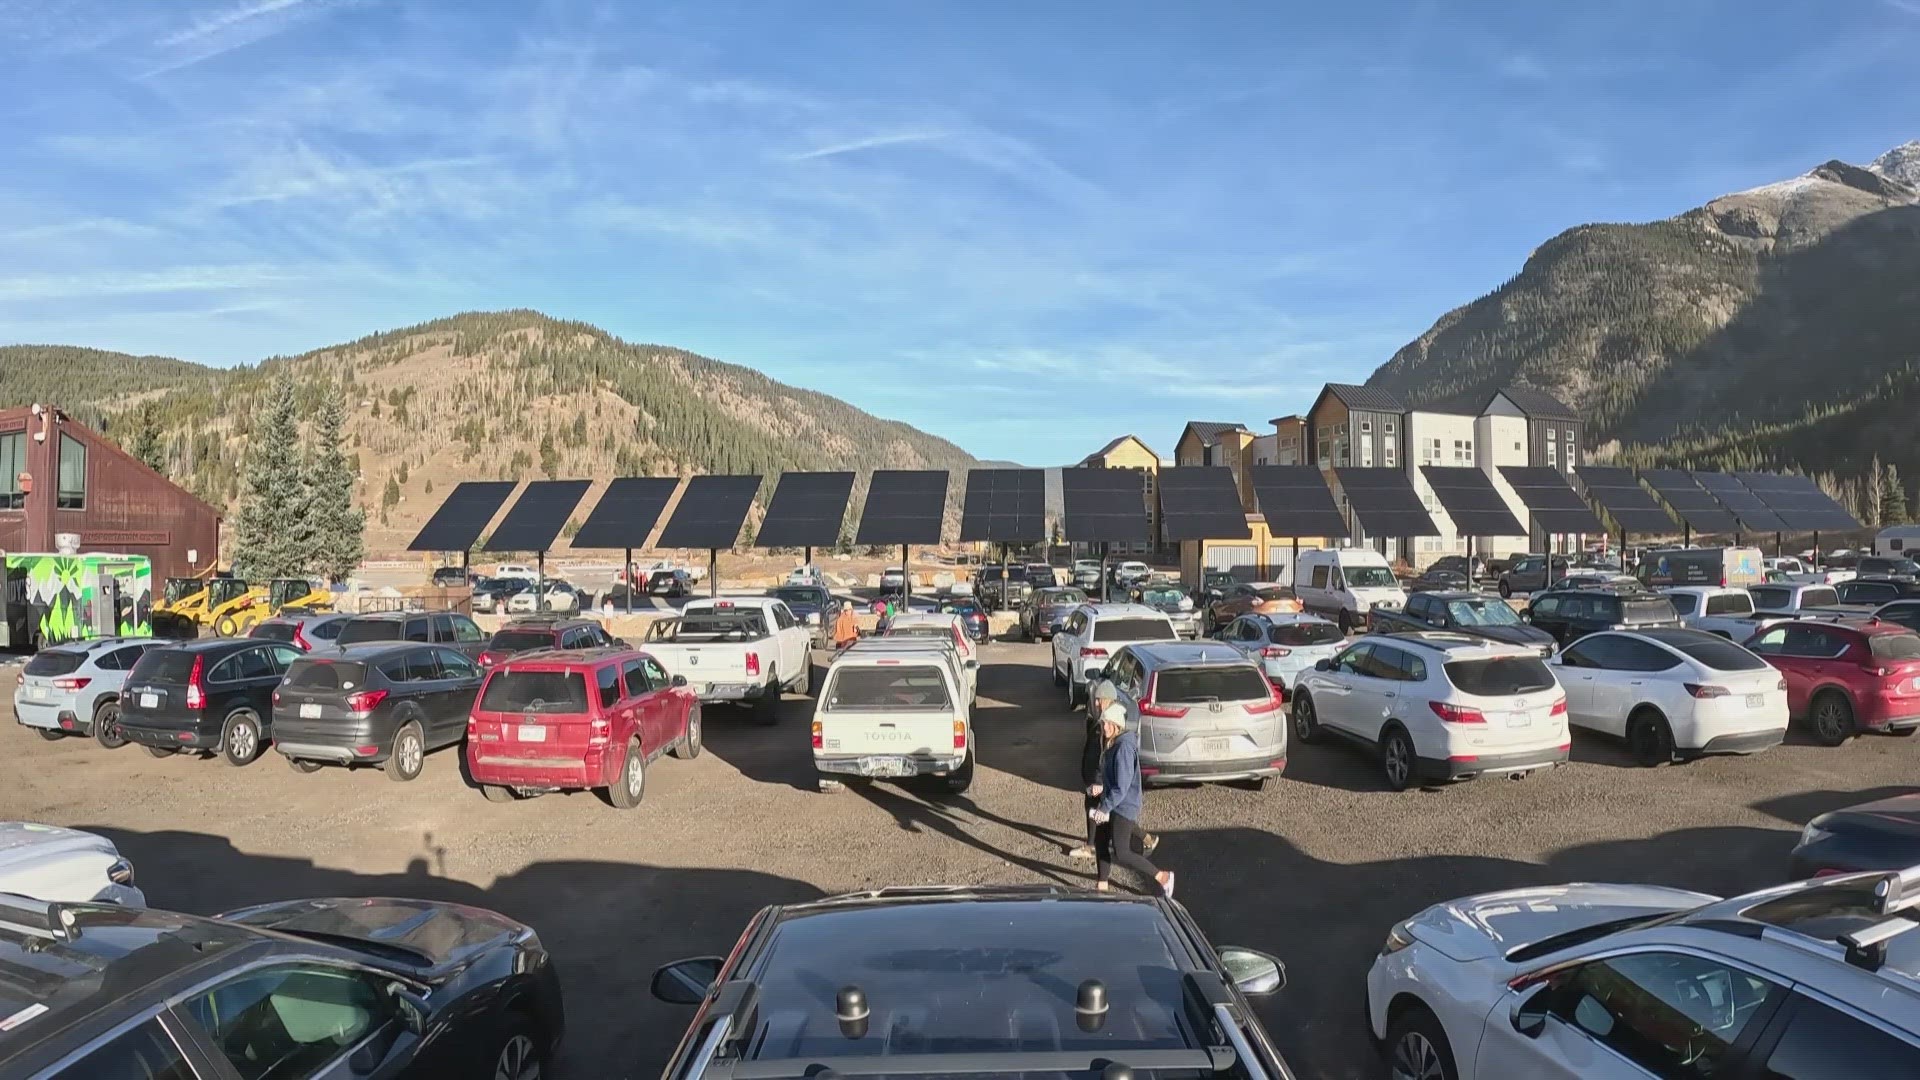 Copper Mountain just opened for the winter season, and they've added 900 additional free parking spaces to get visitors parked faster than in previous years.